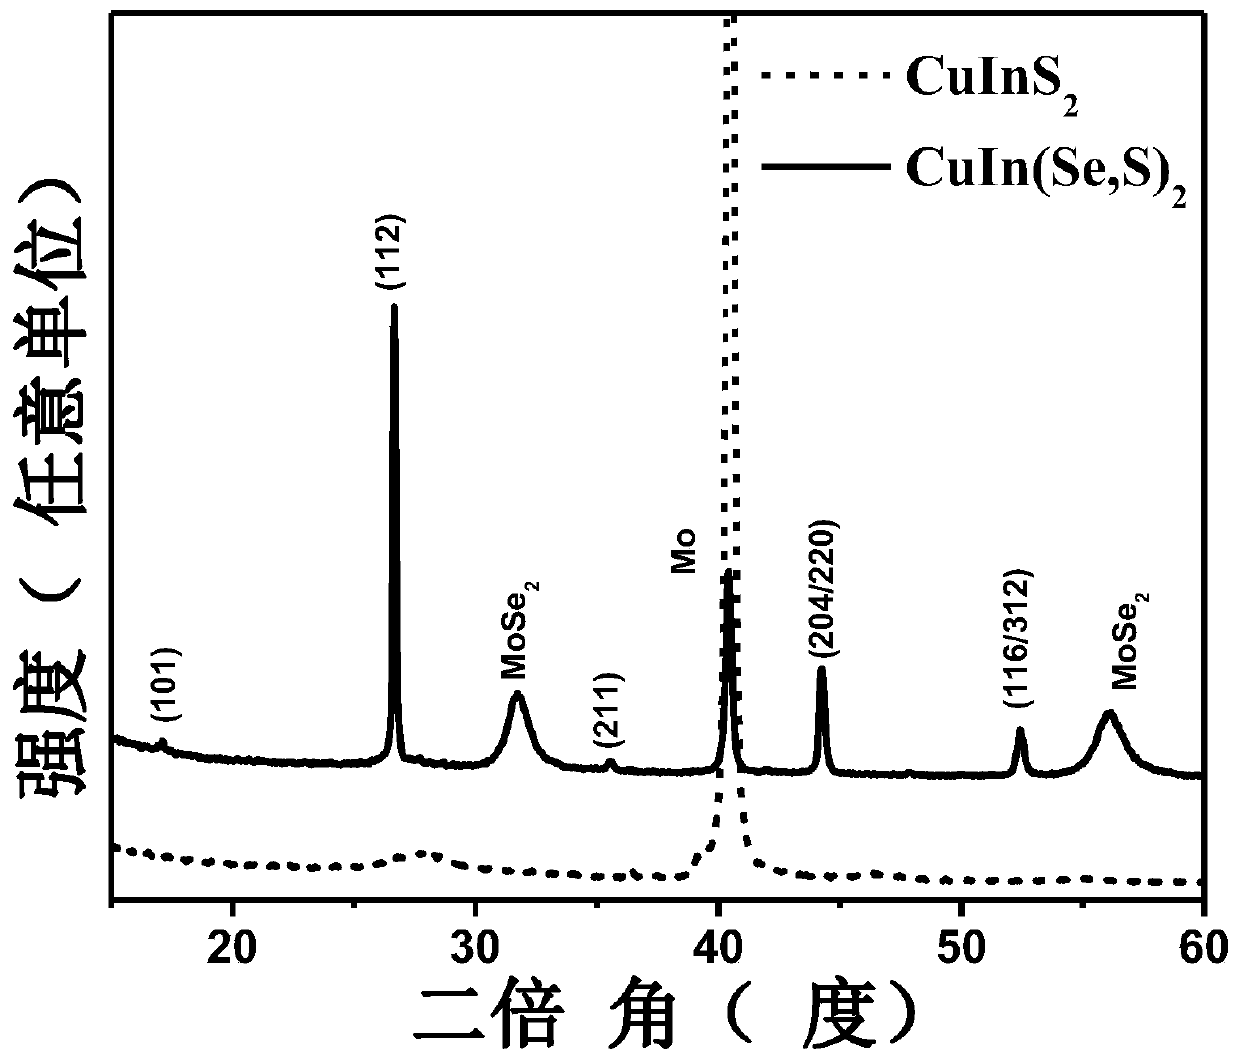 Solution method for preparing high-efficiency CIS and CIGS thin-film solar cell